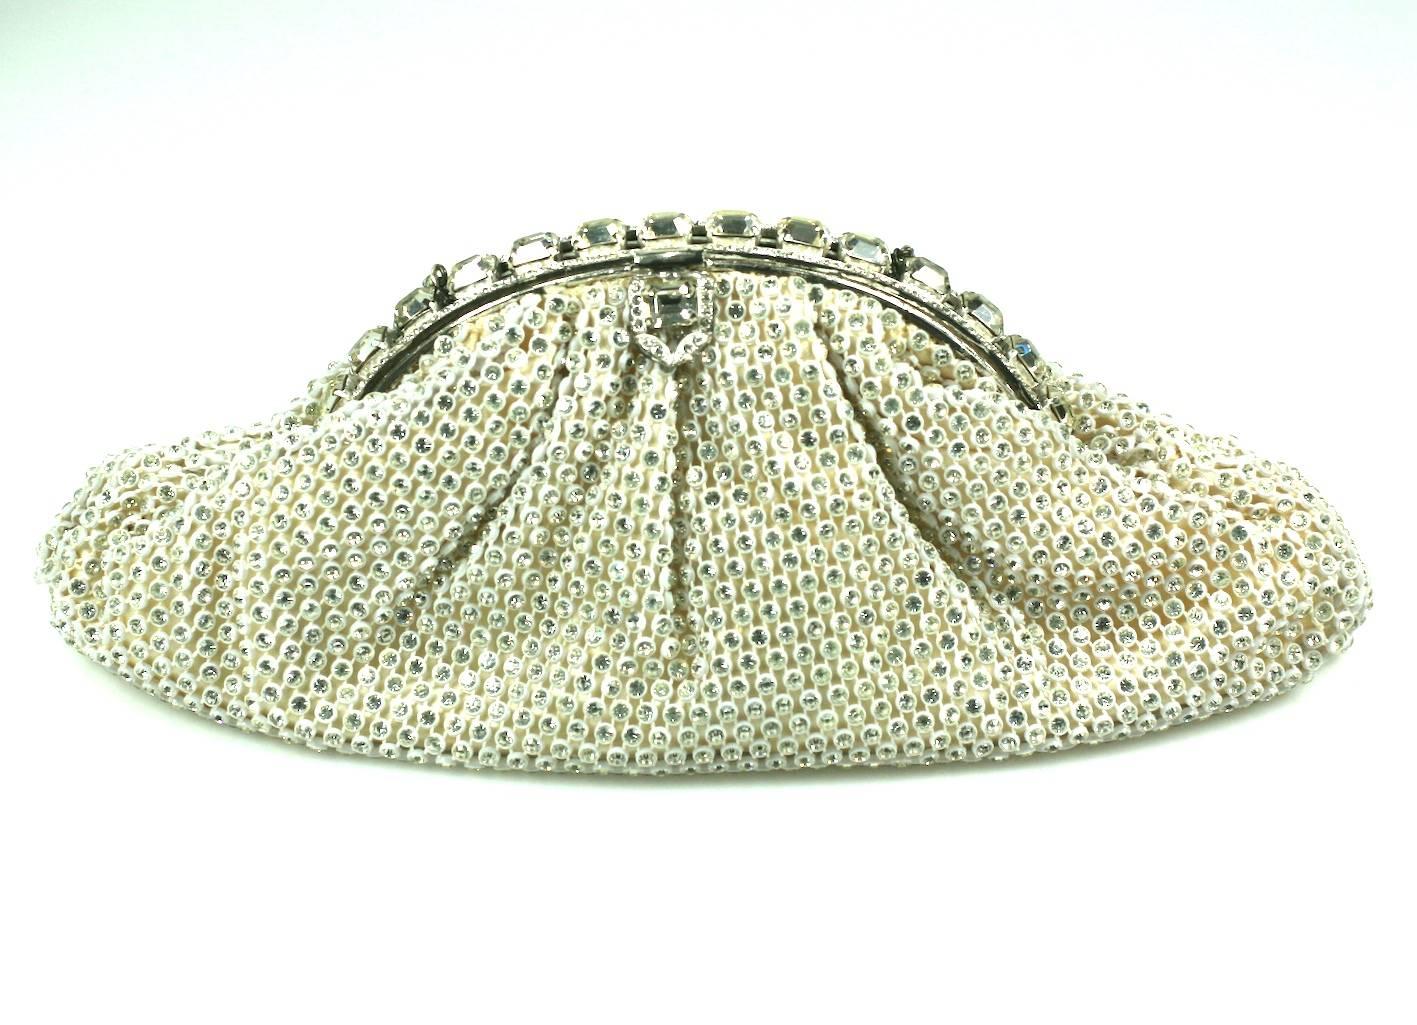 Elegant Pave Rhinestone Studded Evening Bag retailed by Neiman Marcus. Body of bag is made of a plasticized mesh which is embedded with Swarovski crystal rhinestones. The frame is composed of large, sparkly emerald cut crystals across the top.